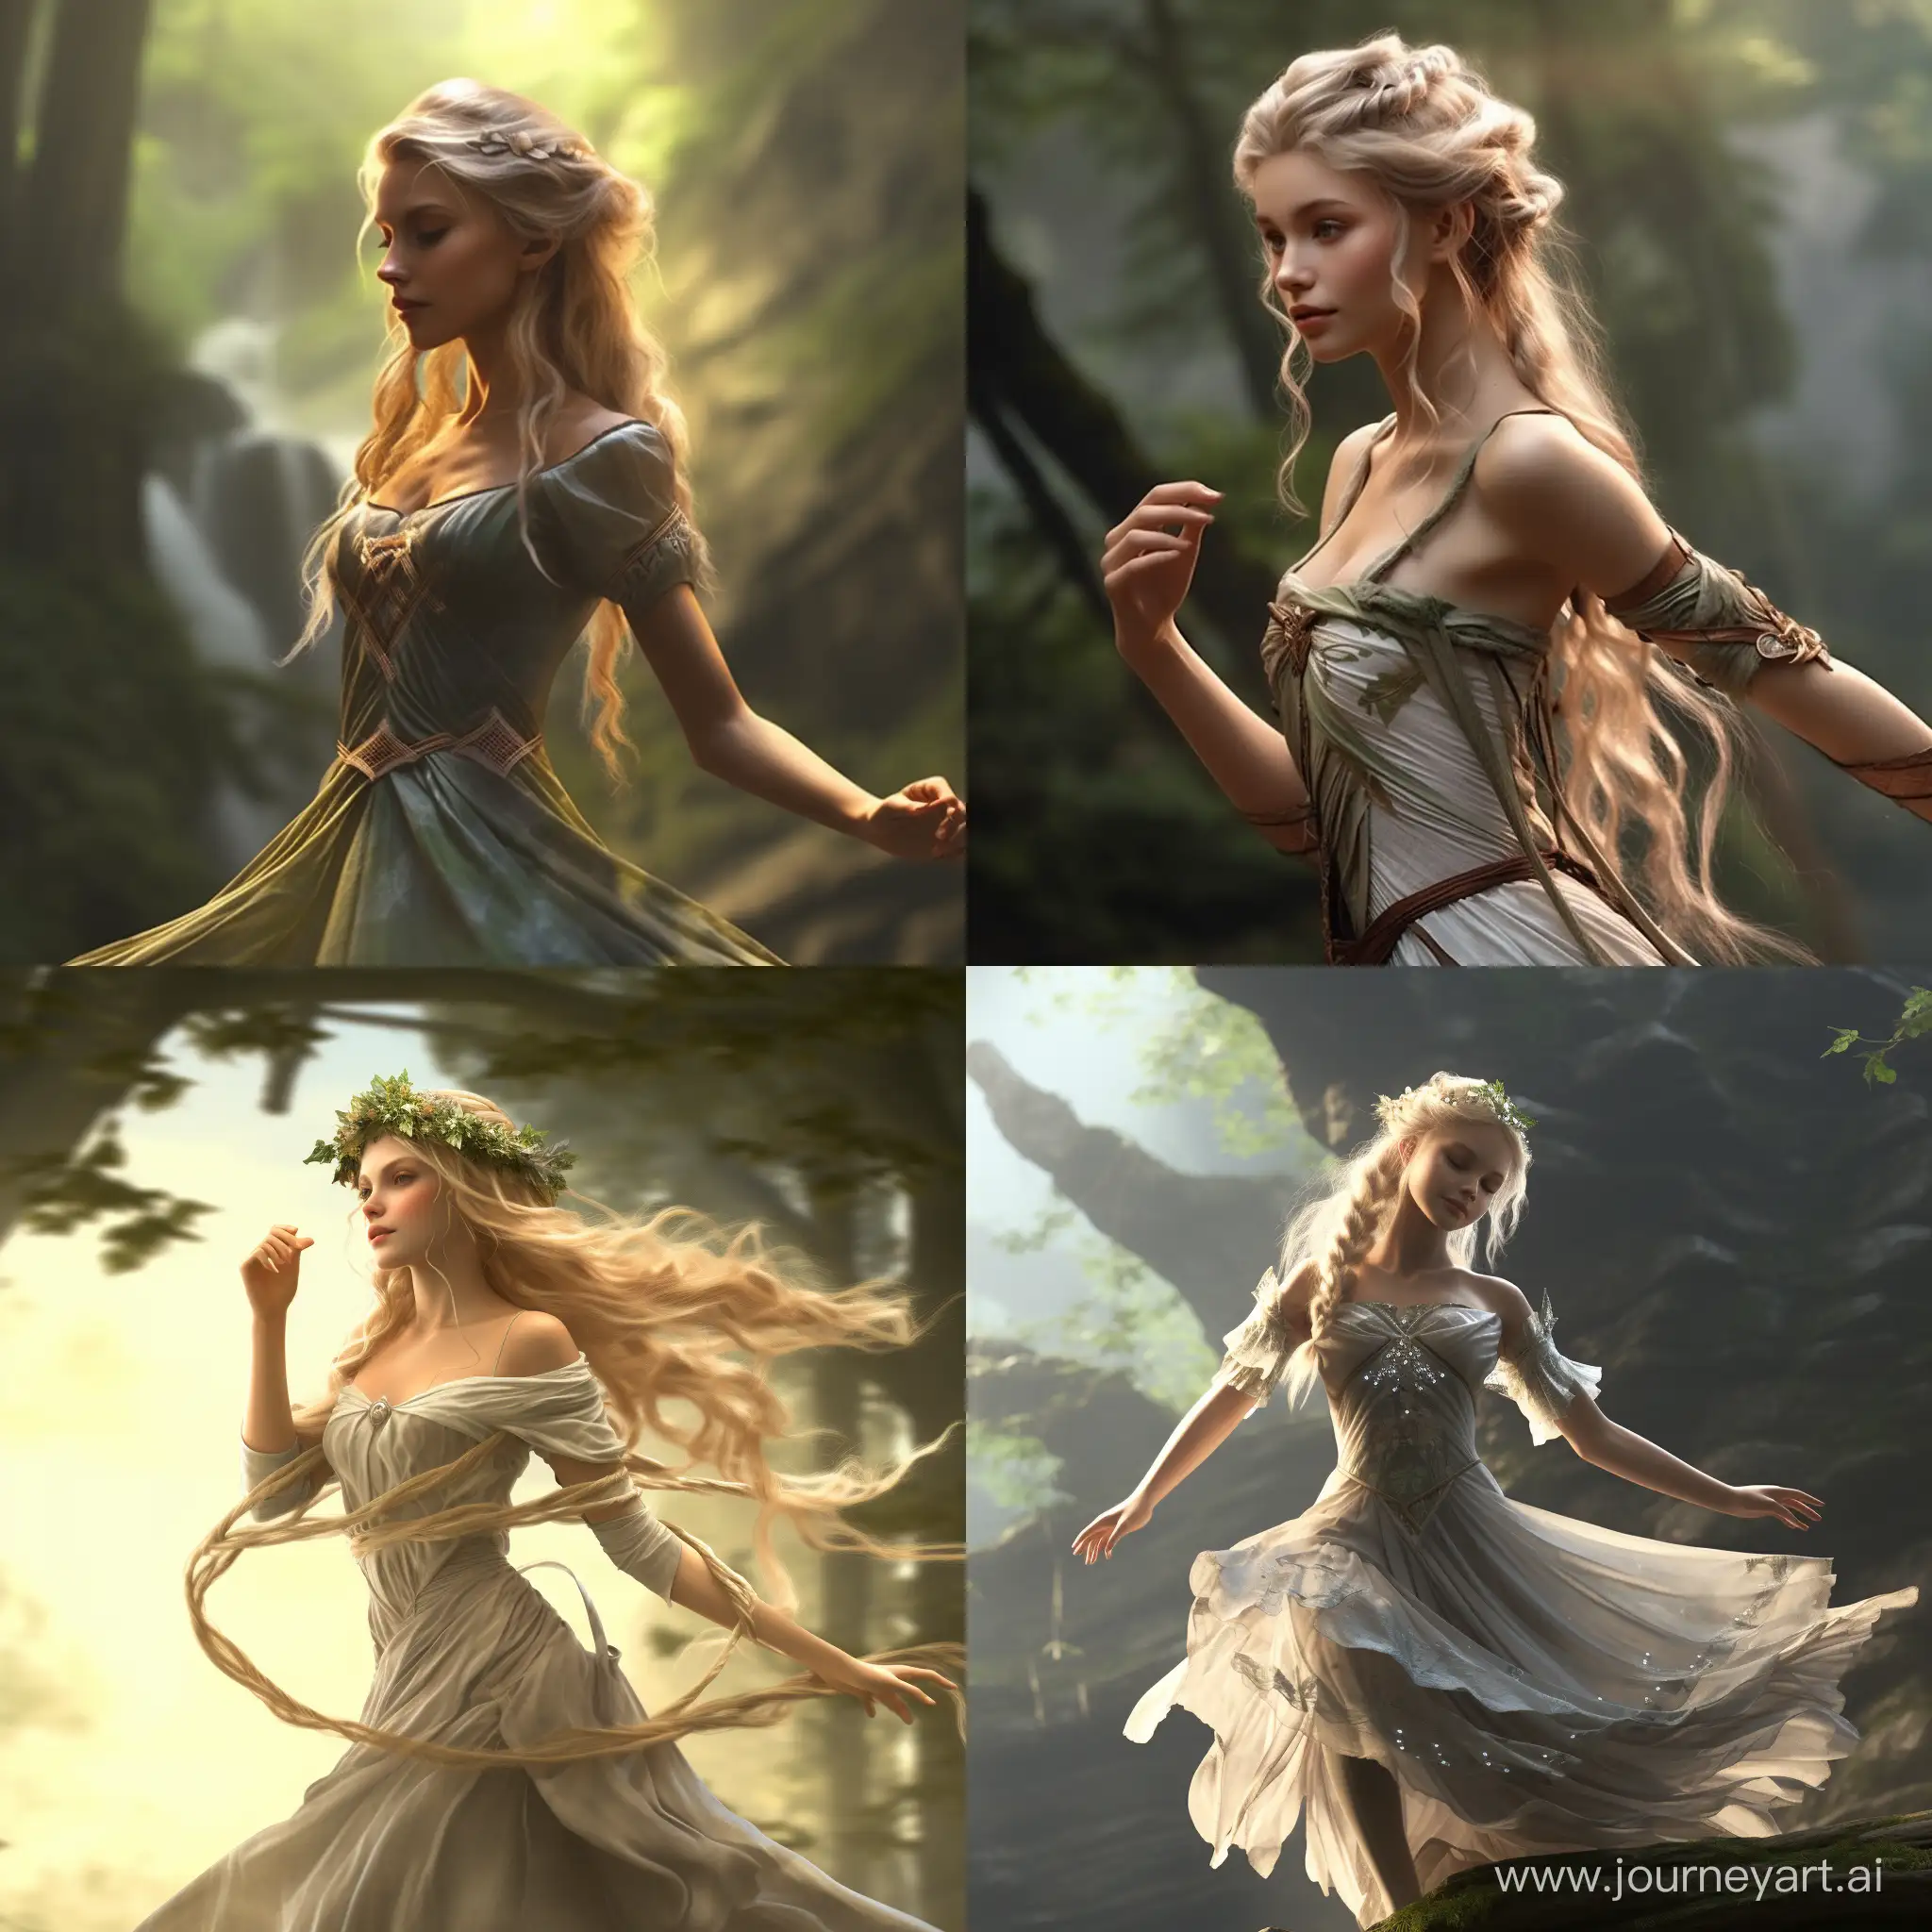 Dancing elf girl from Middle Earth, inspired by J.R.R. Tolkien's works, is characterized by ethereal beauty, pointed ears, and a slender frame. Elves are skilled in archery, magic, and possess an ageless grace. They often wear elegant, nature-inspired attire, and their connection to the environment is reflected in their harmonious and timeless demeanor.